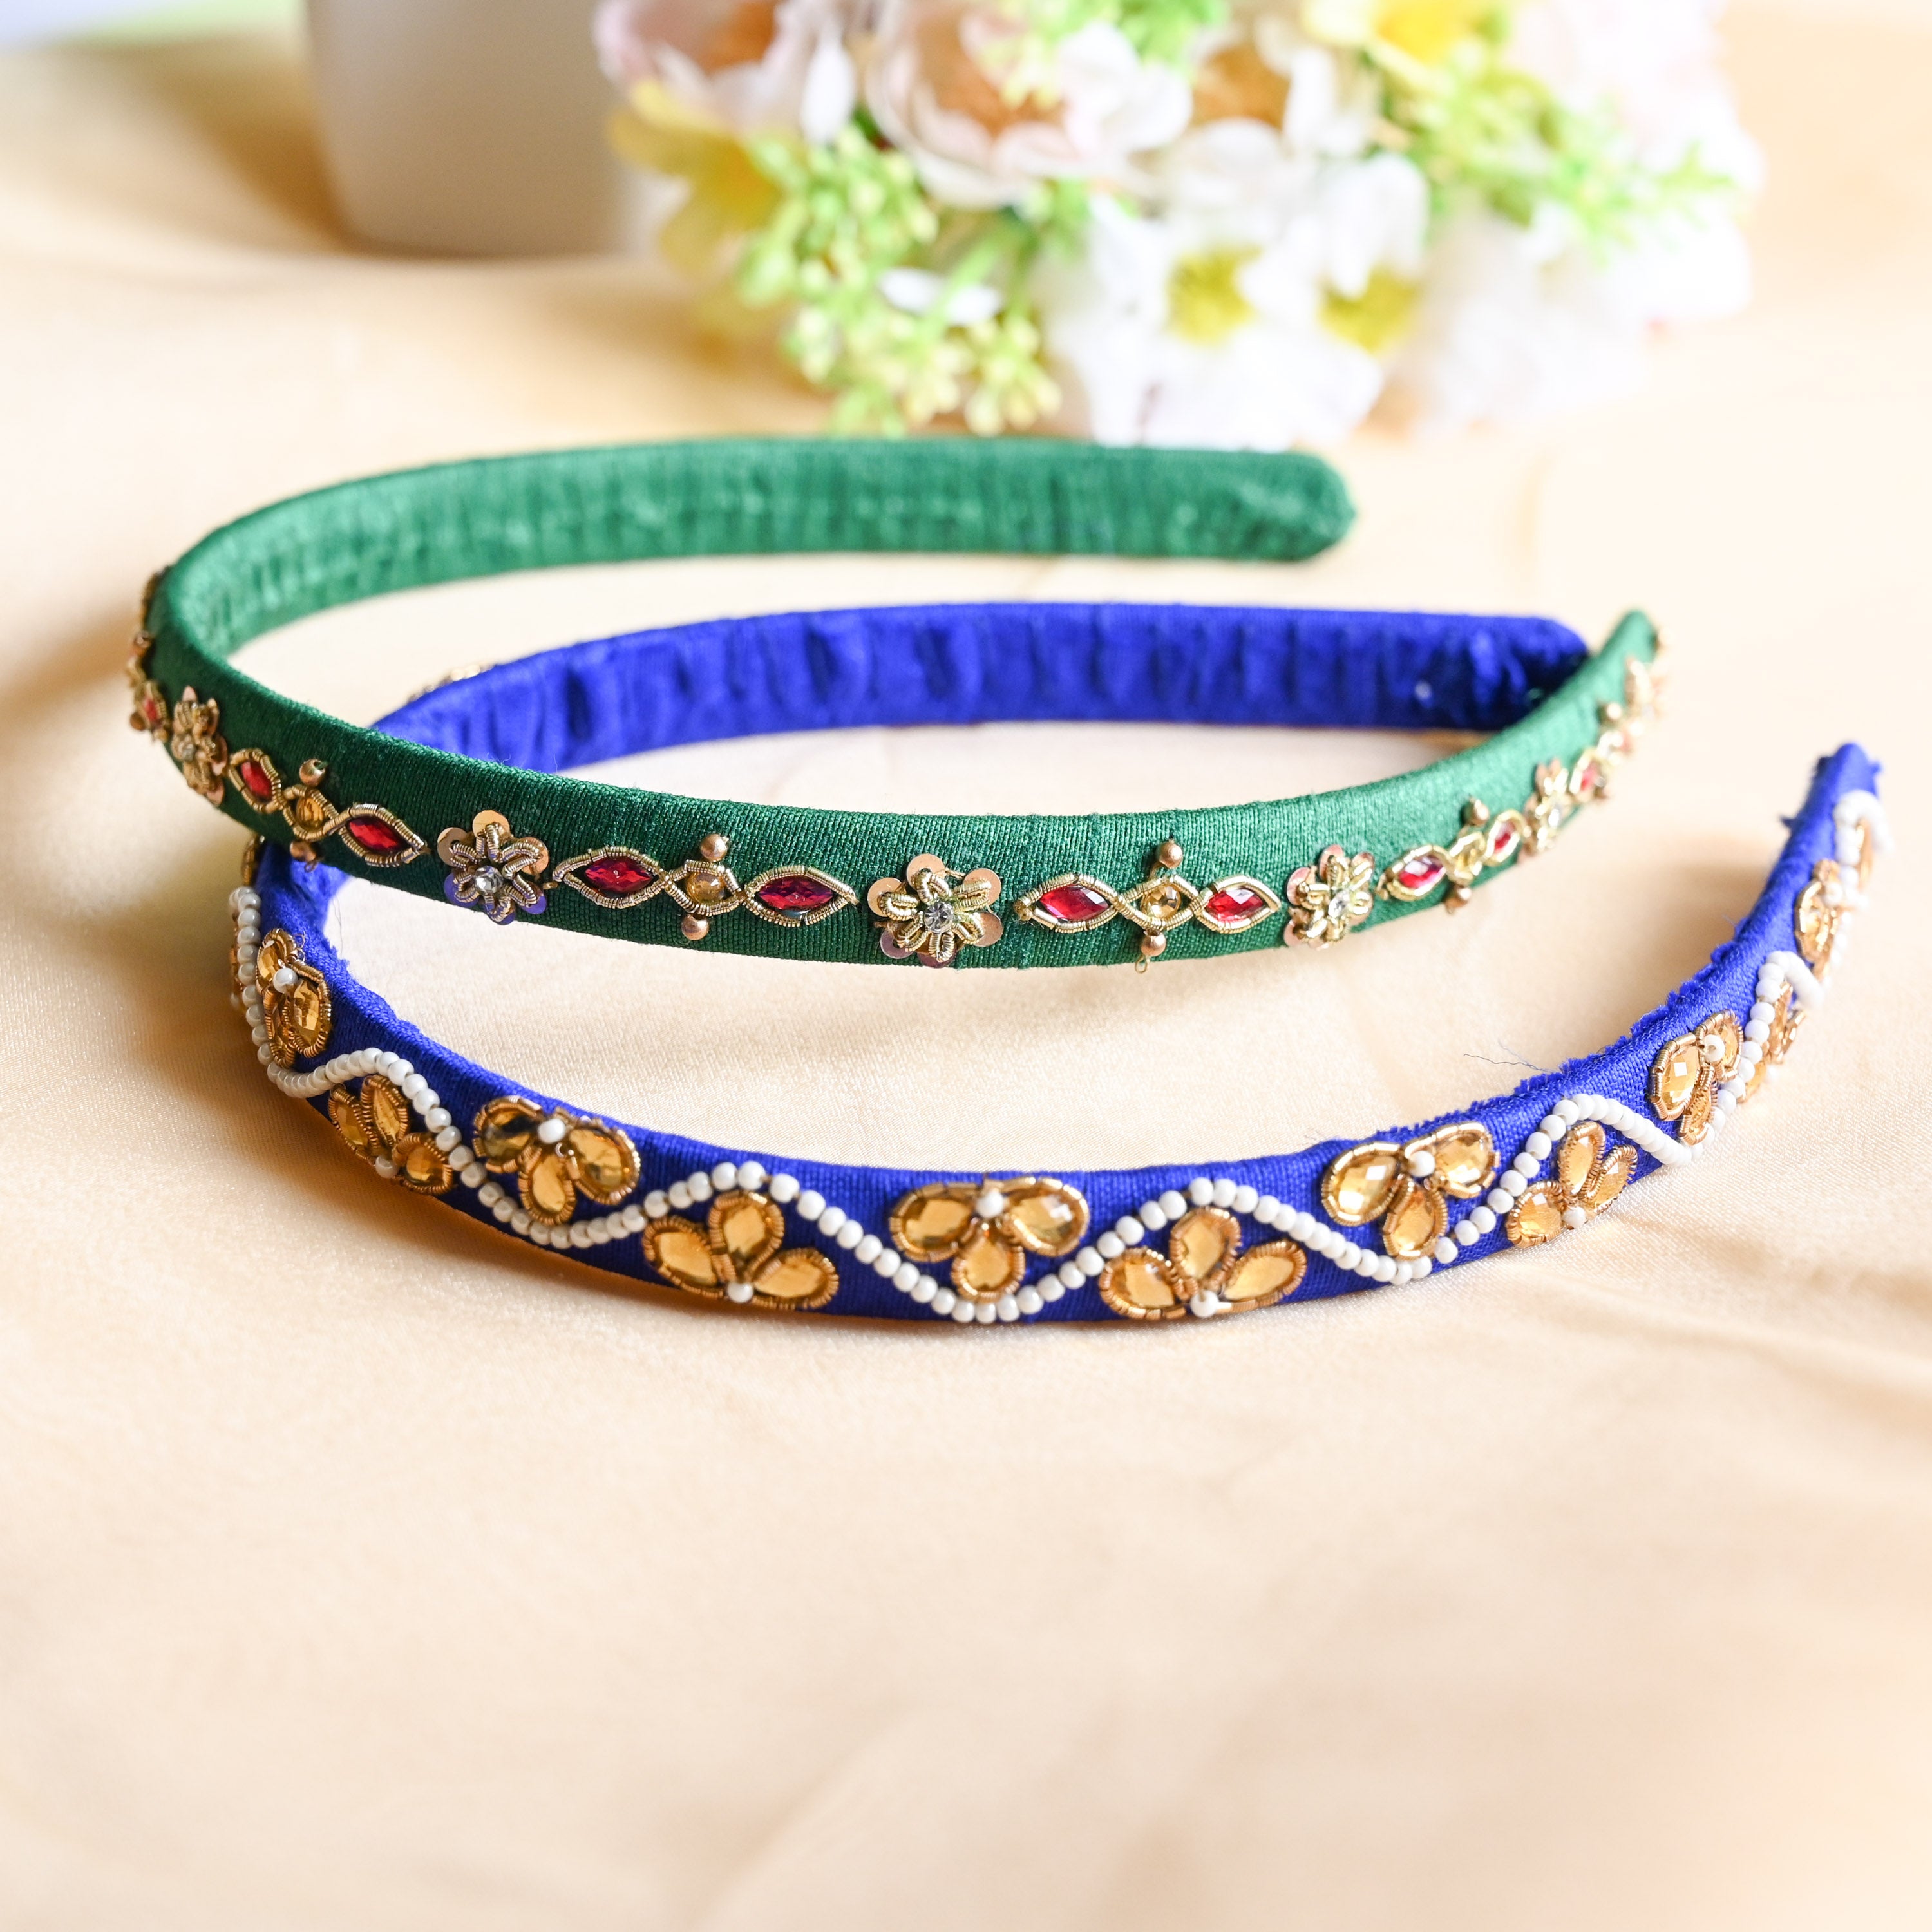 Colorful Headbands for Girls